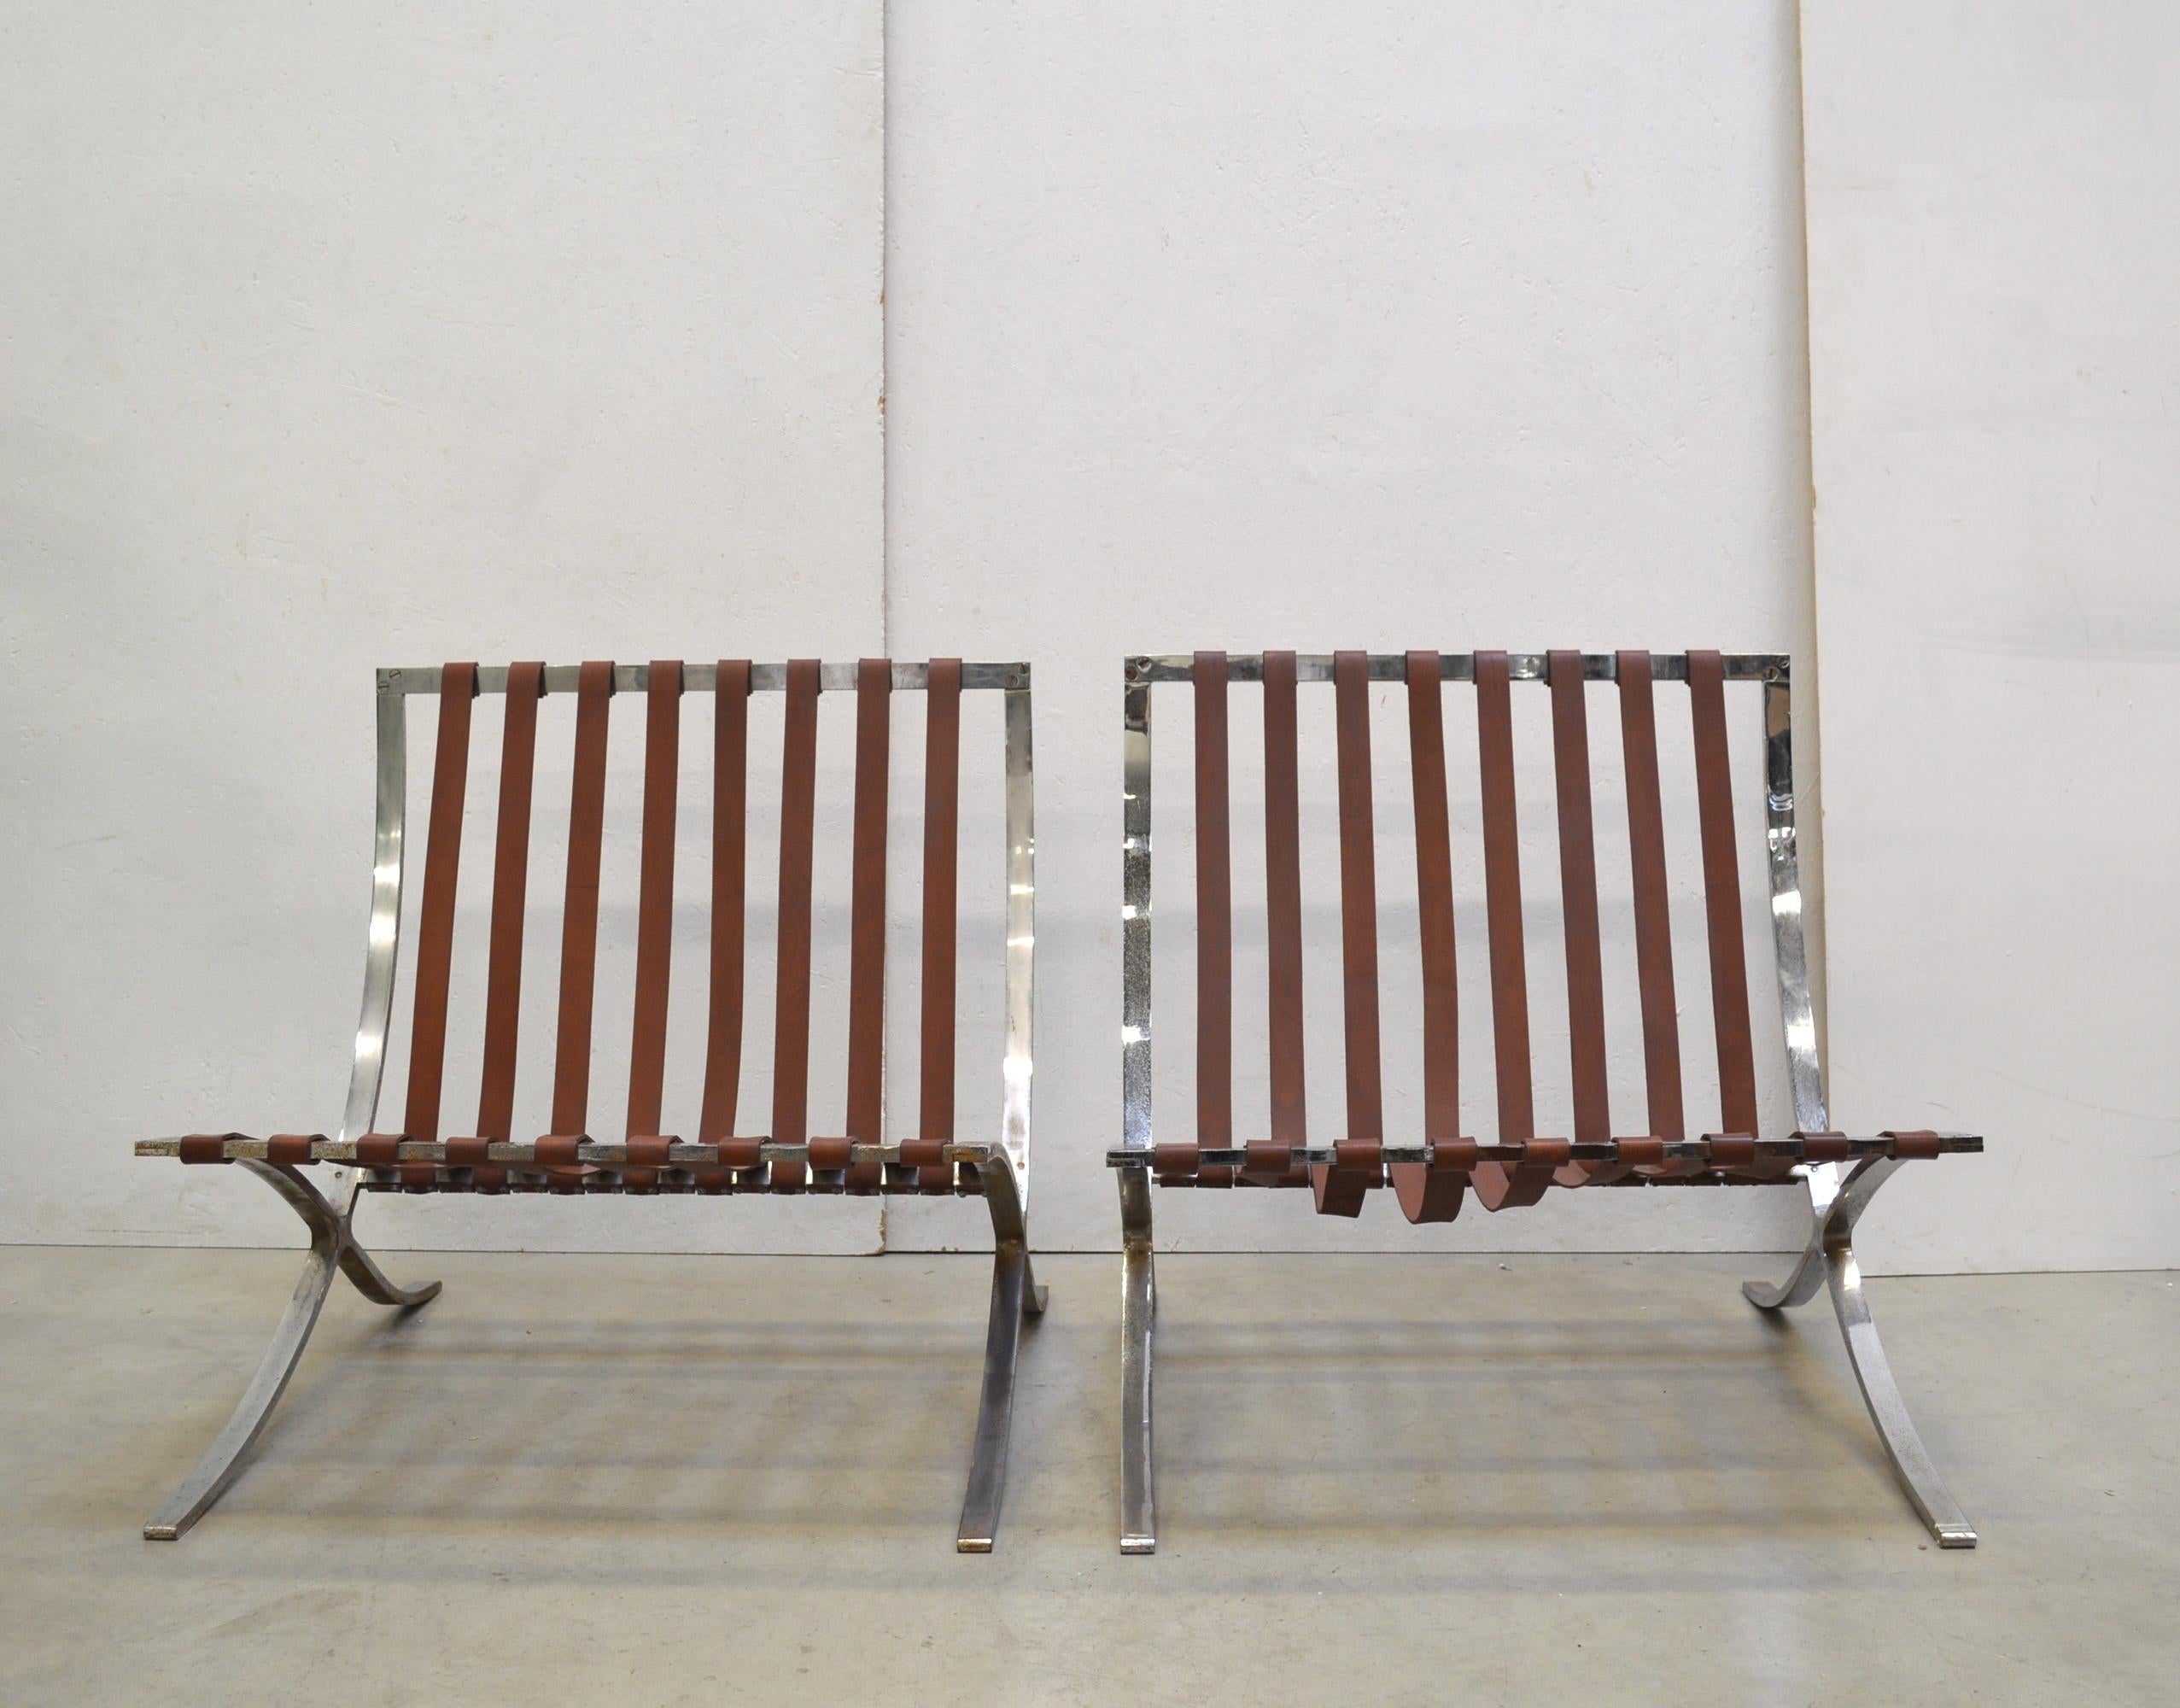 These rare Barcelona chairs were designed by Mies van der Rohe in 1929 for the famous Barcelona pavillon and produced by Stiegler in the 1950s. 

Stiegler was a small company who constructed the frames for Knoll International between 1954 and